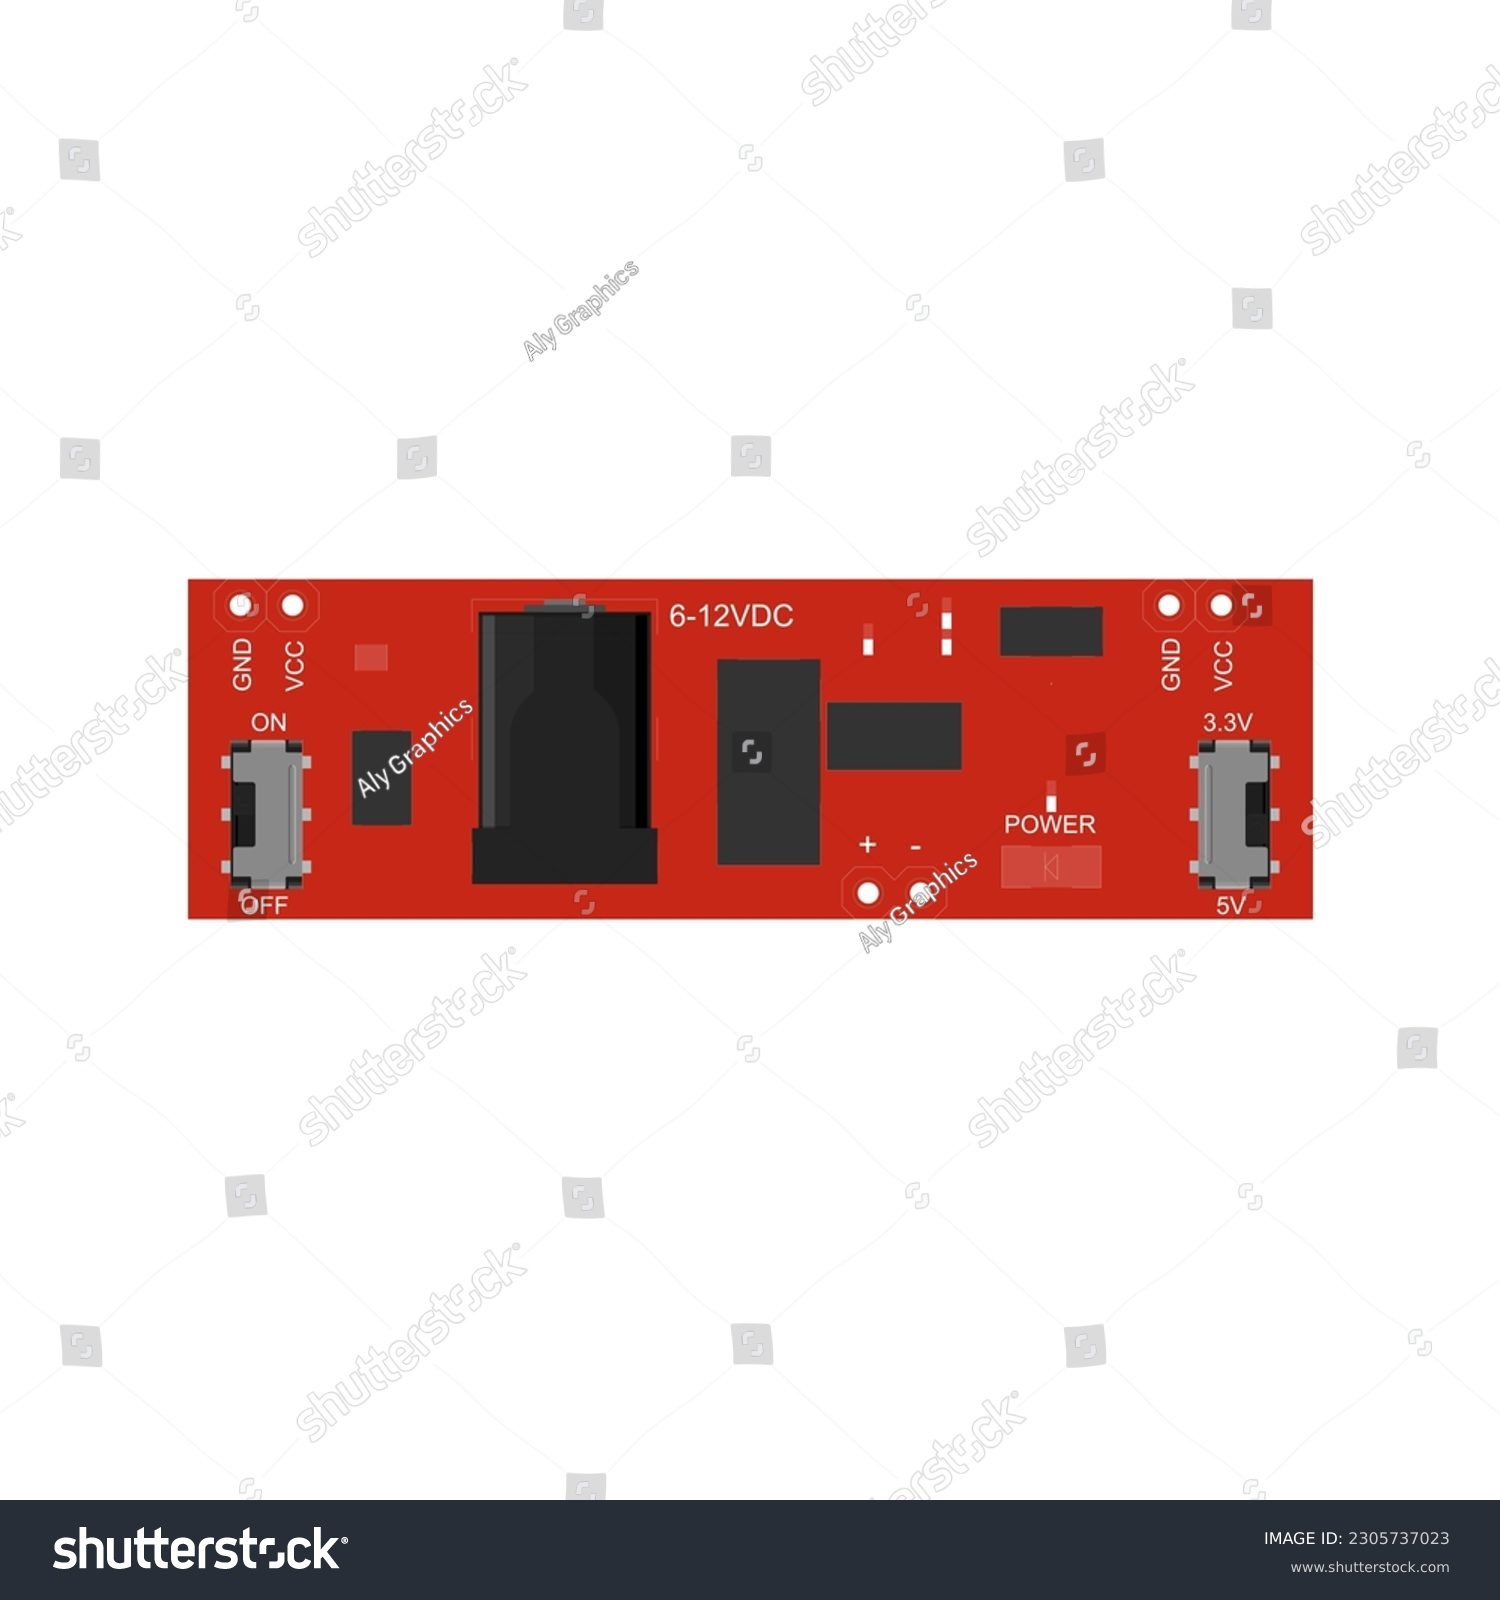 SVG of Download a high-quality vector illustration of a breadboard power supply - SMD (Surface Mount Device) with adjustable voltage, DC power input, onboard regulator, and convenient power distribution svg